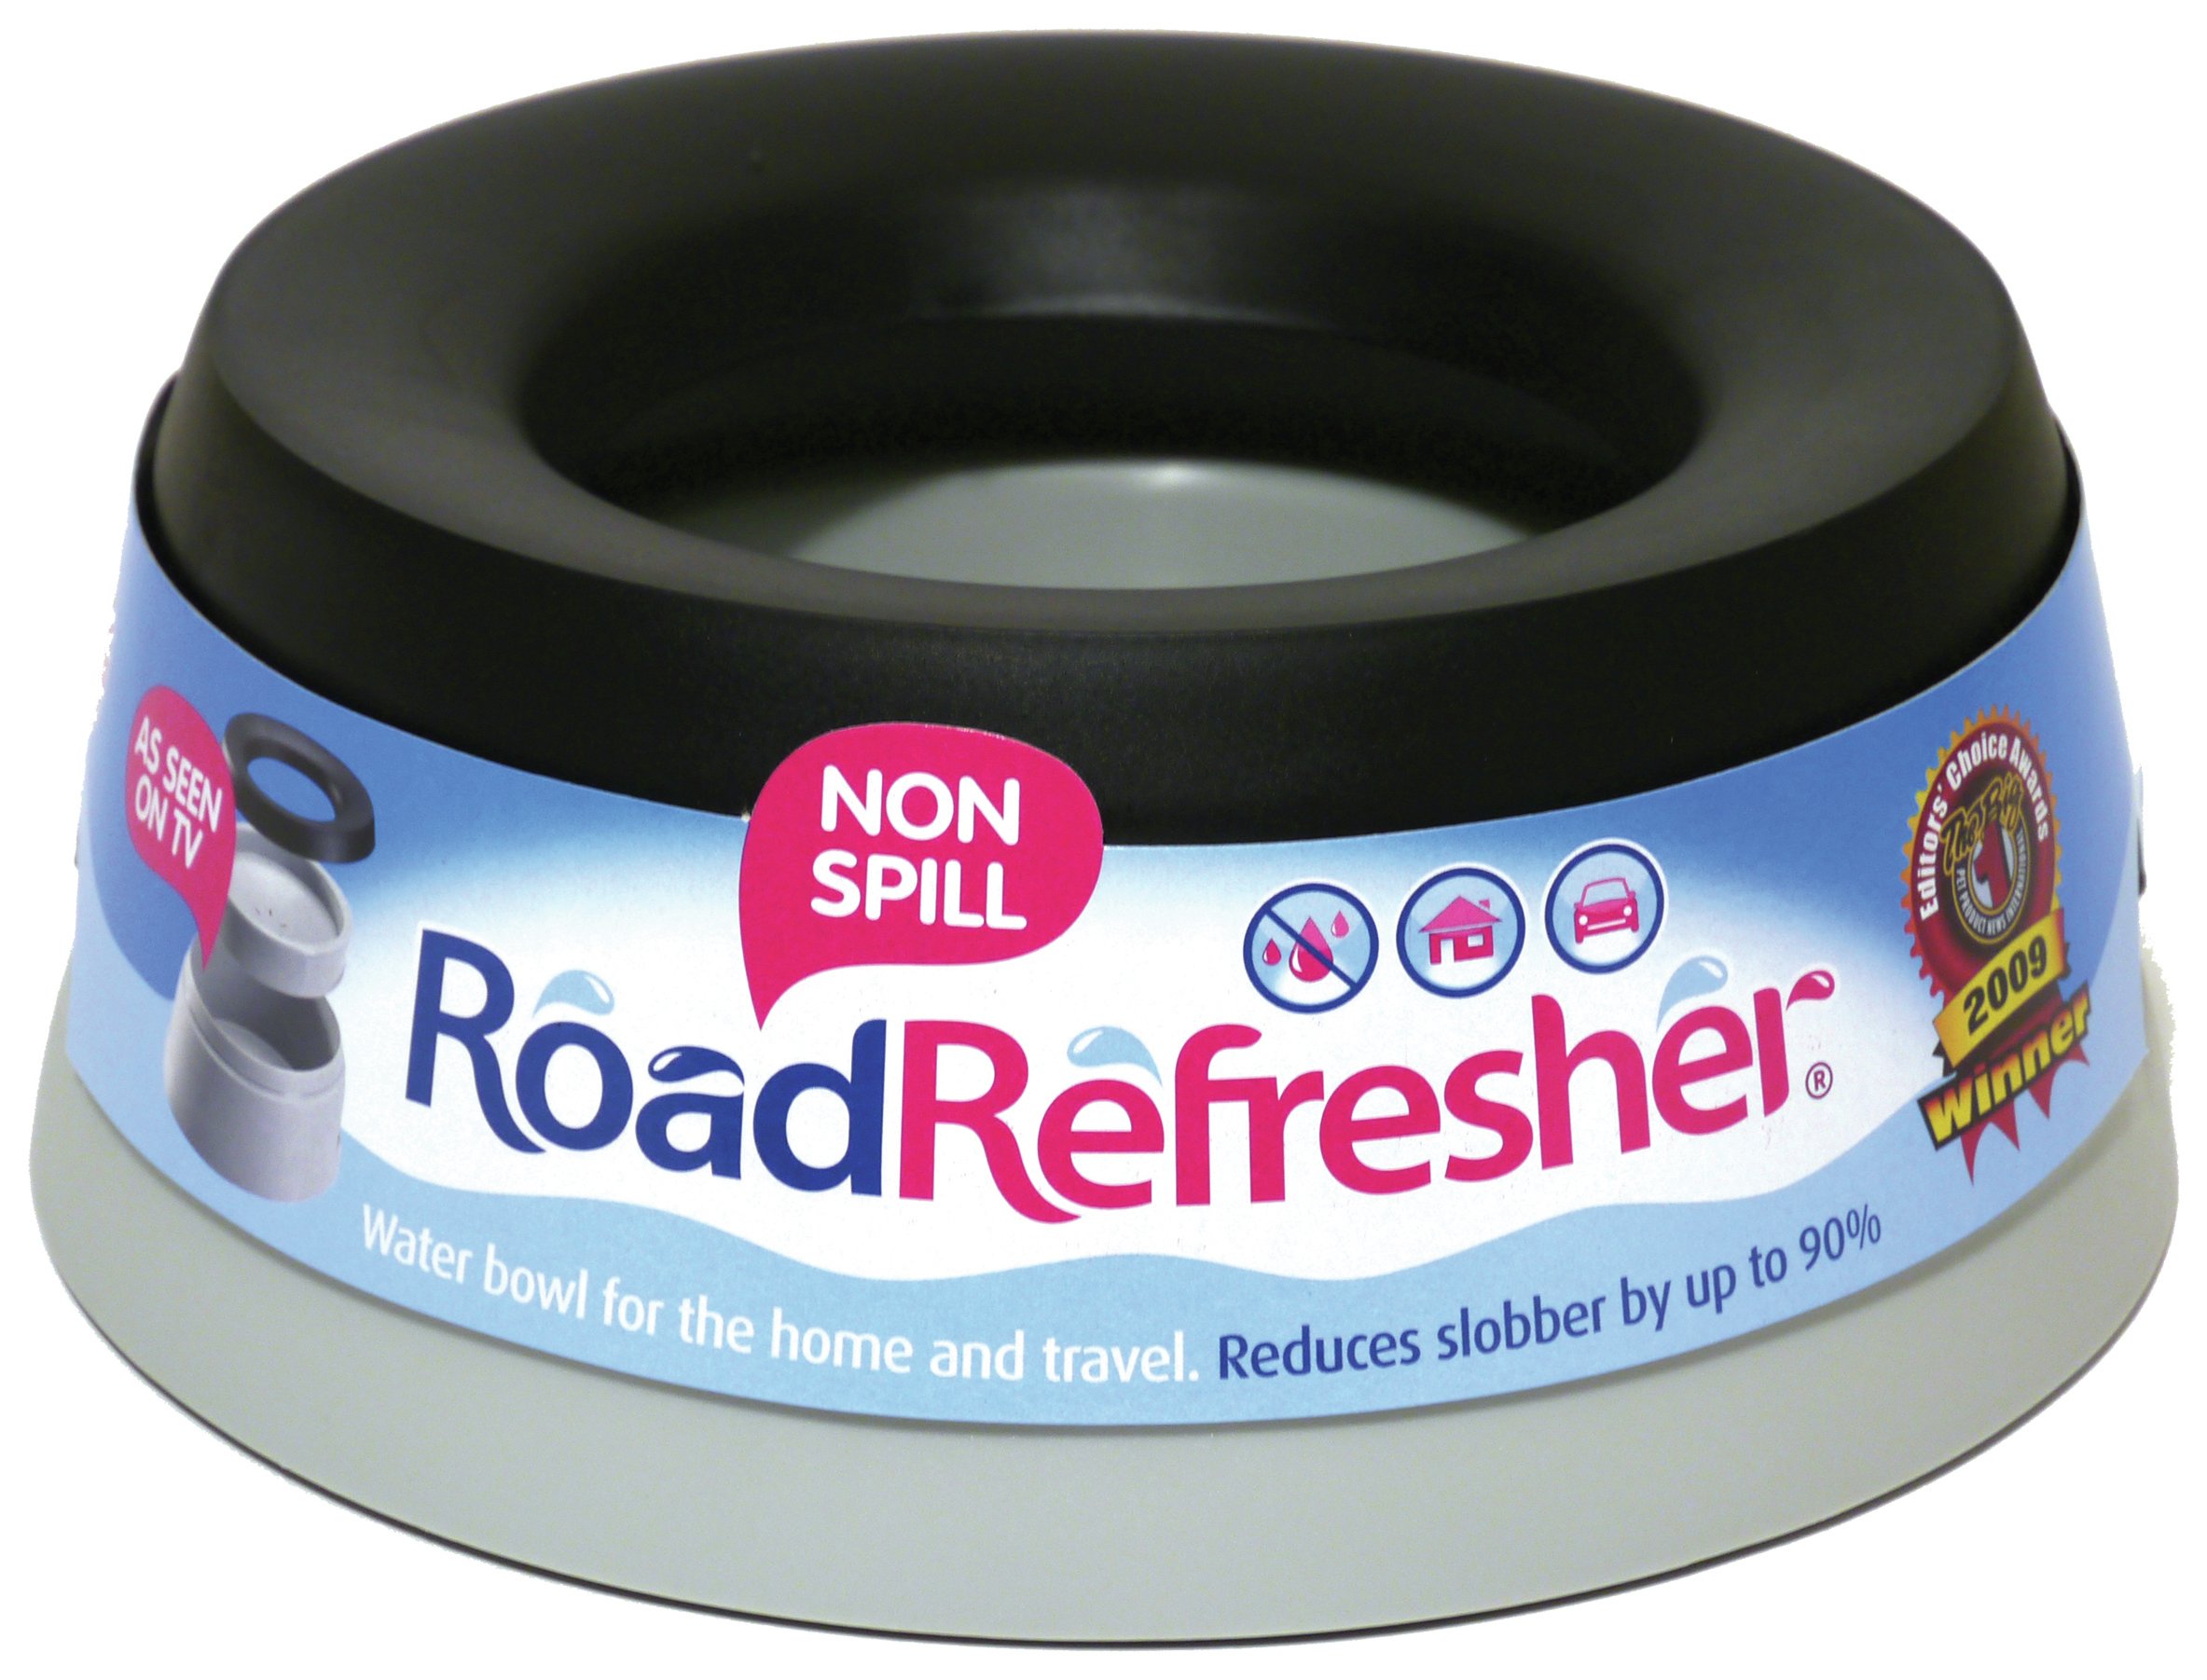 Rosewood Road Large Refresher Bowl review